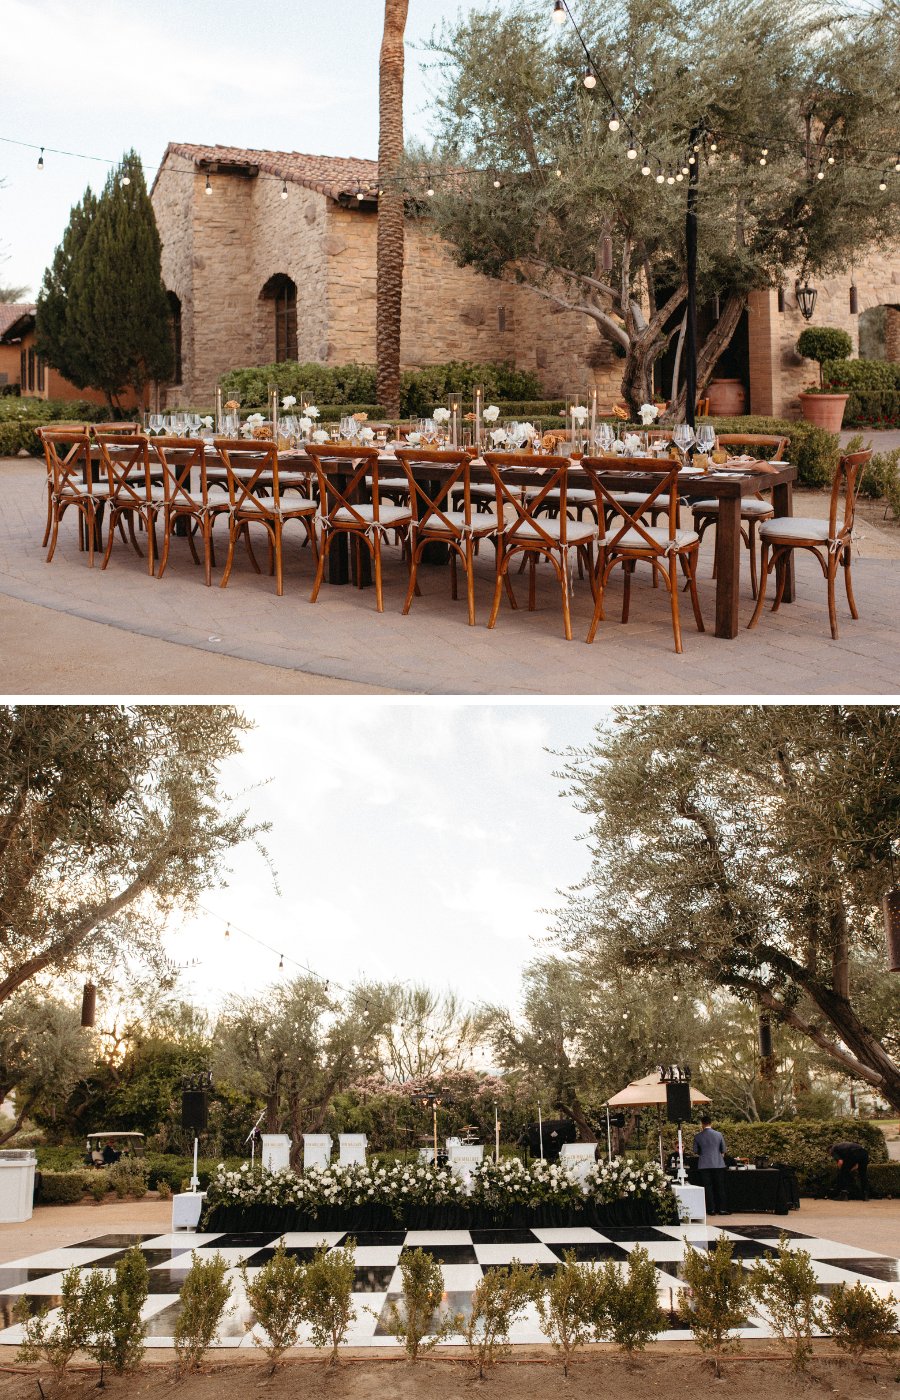 Outdoor wedding reception set up inspired by the Tuscan region of Italy